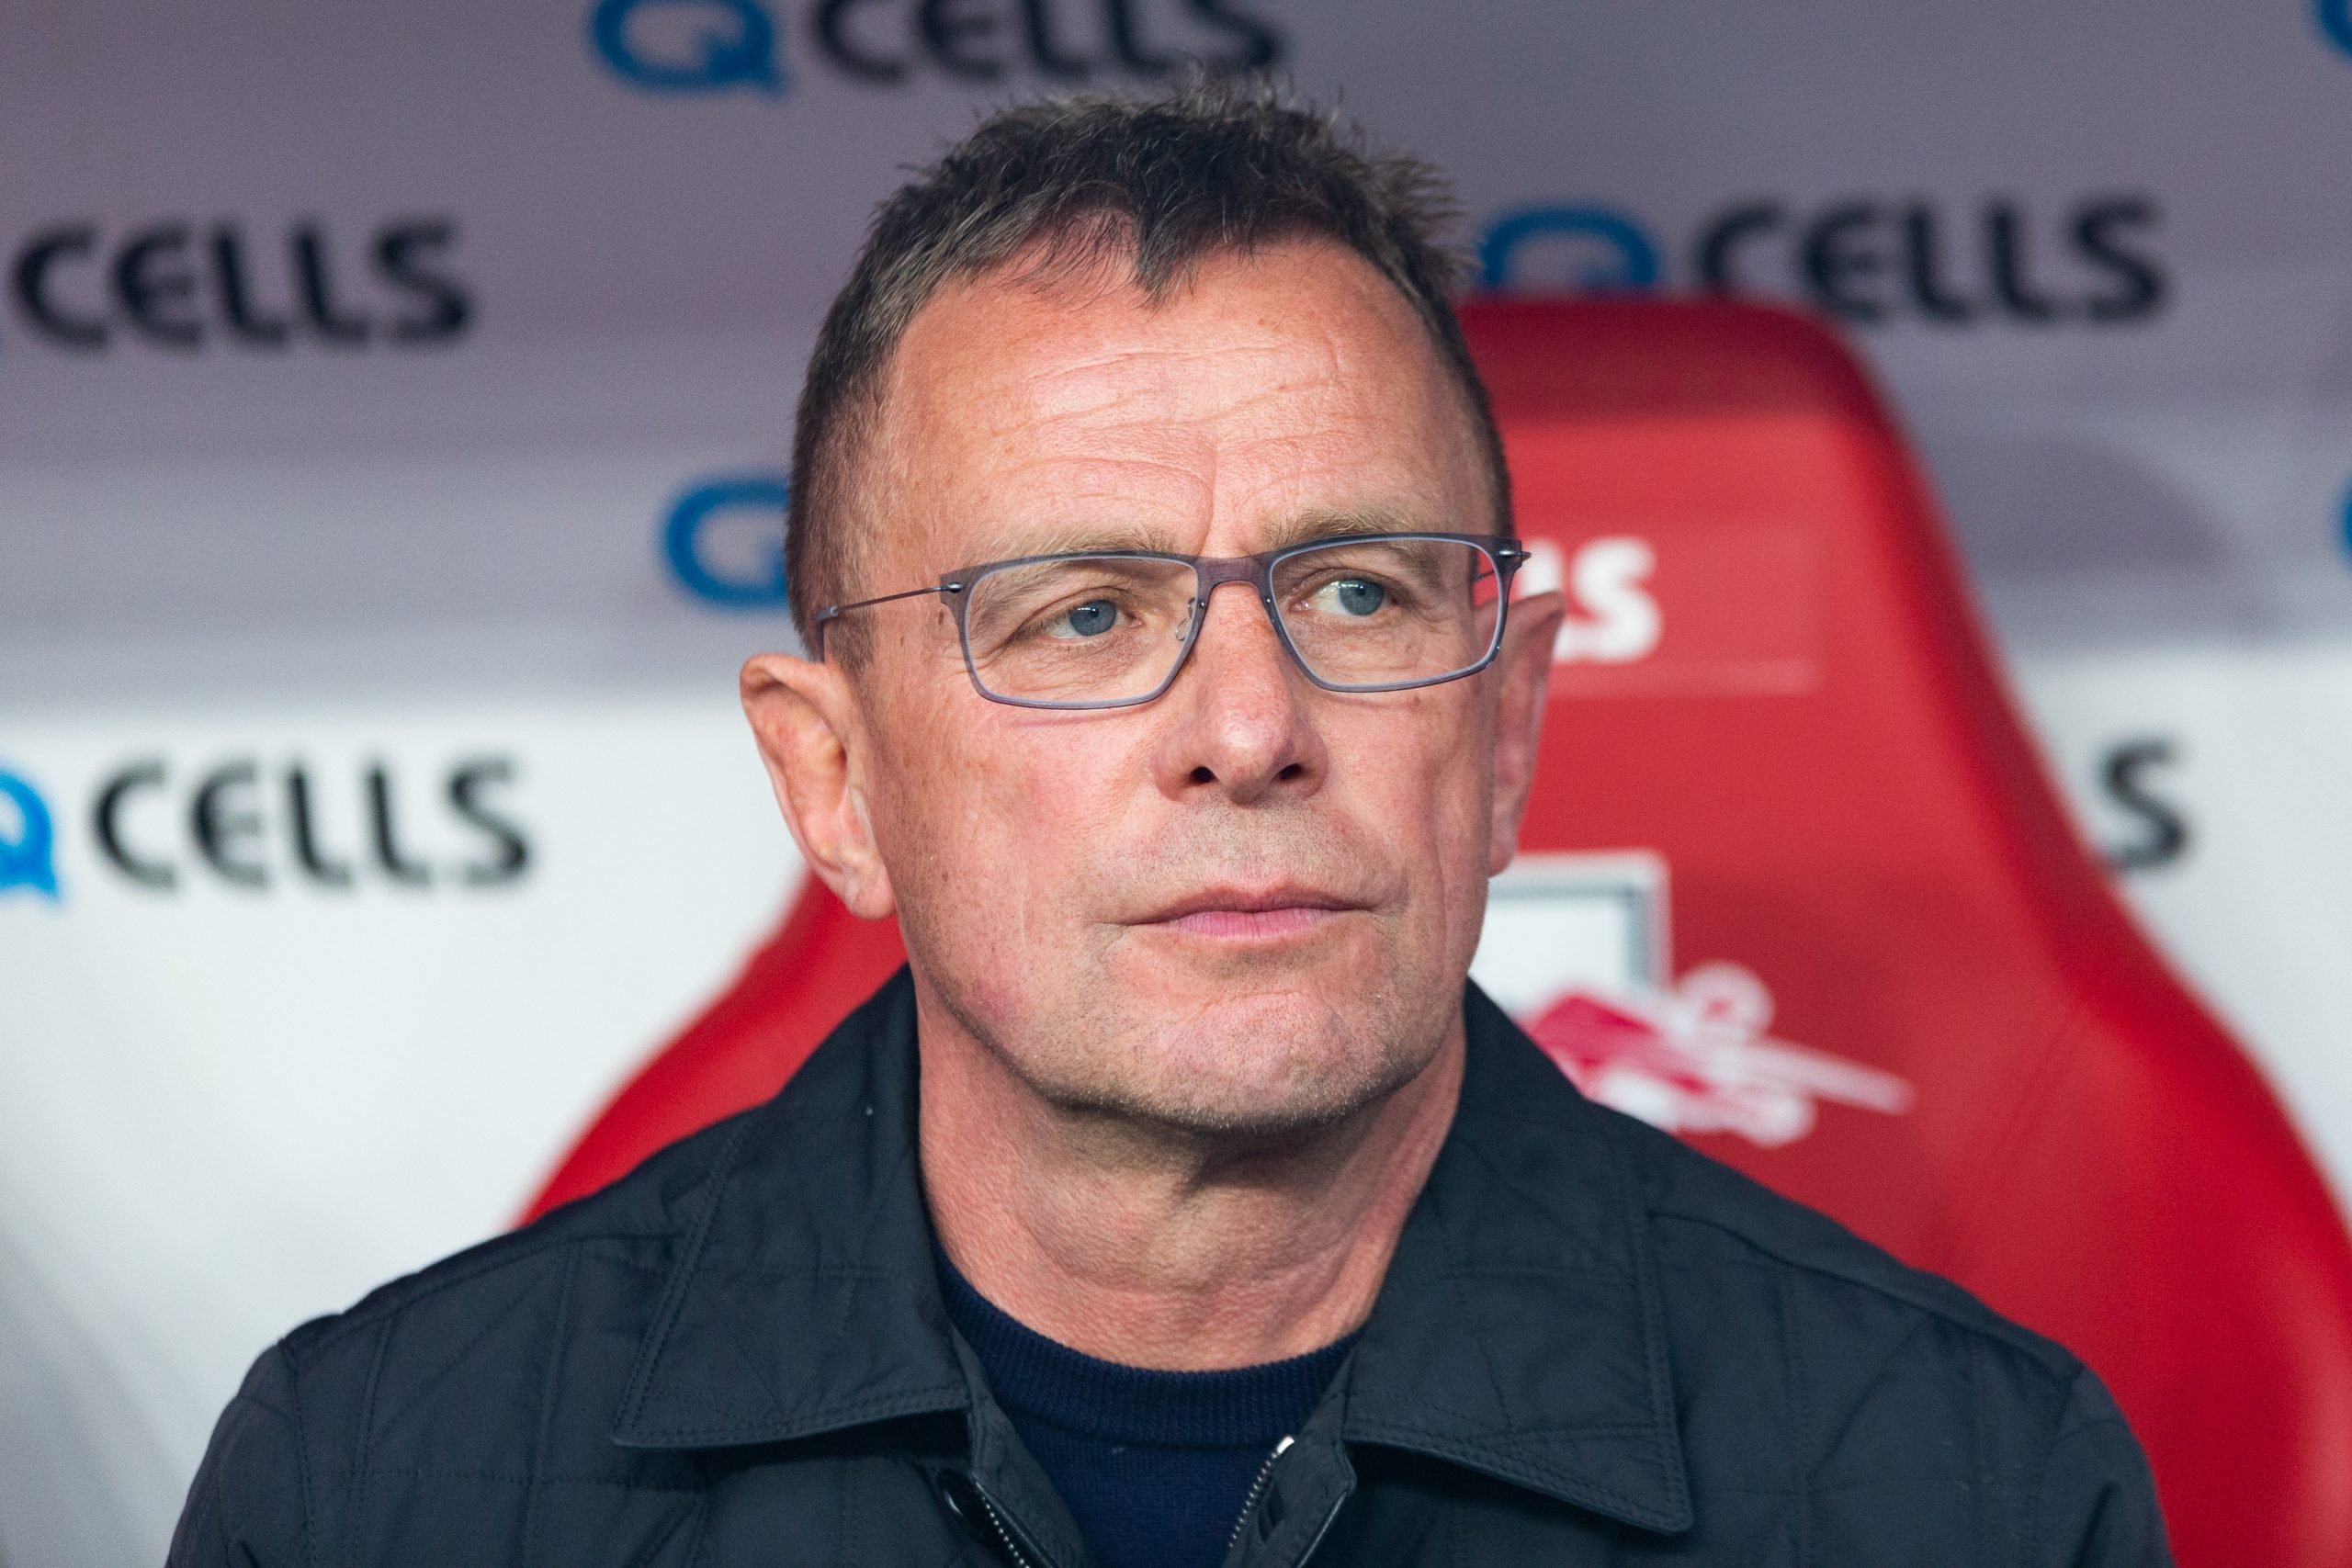 EPL: Ralf Rangnick's formation, style revealed ahead Man Utd move